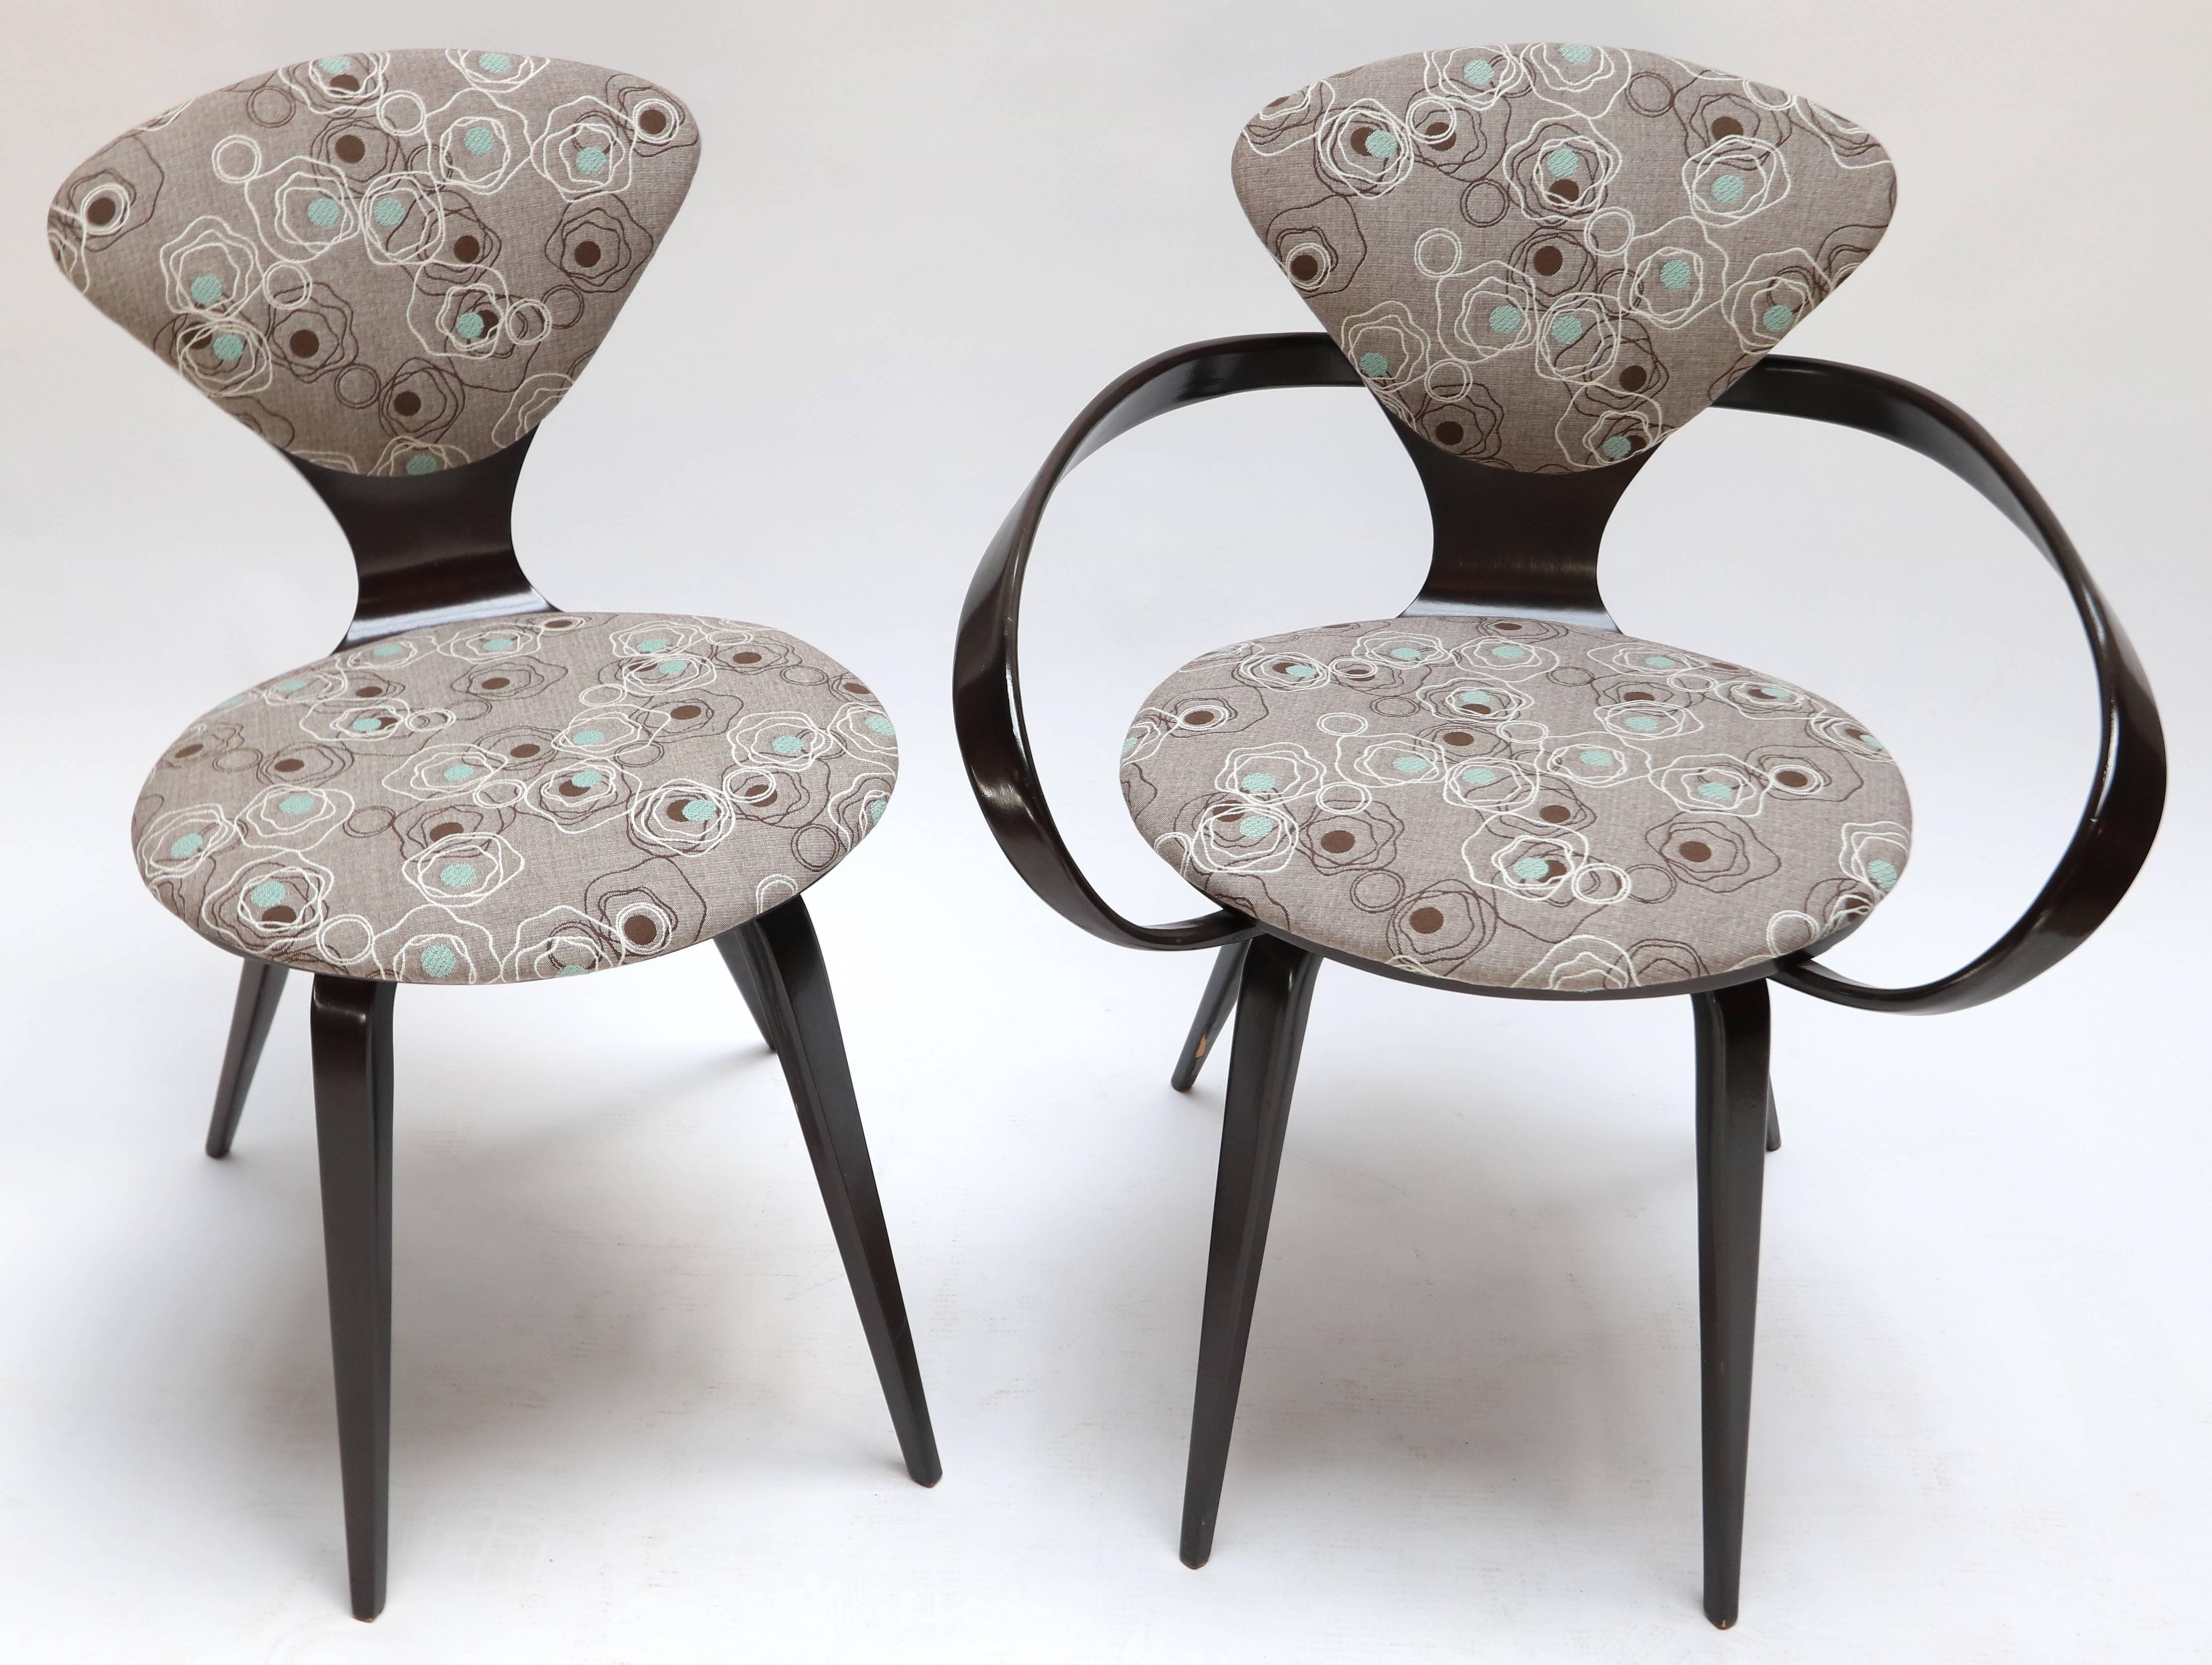 Set of four side chairs and two armchairs by Cherner for Plycraft from the 1960s.